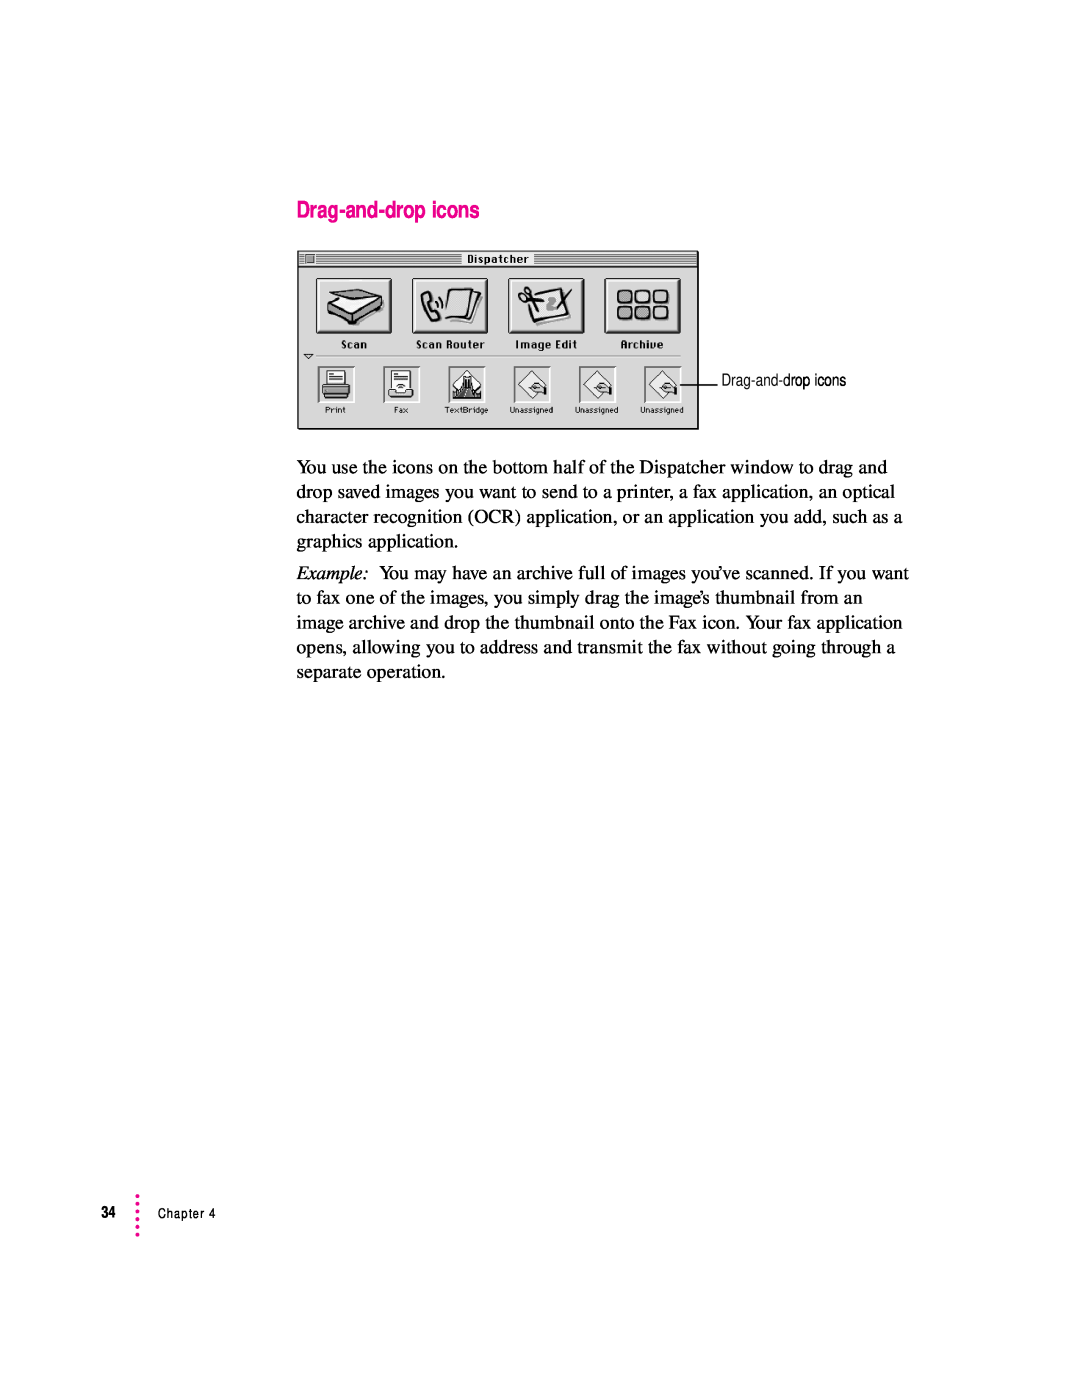 Apple 627, 1230 user manual Drag-and-drop icons, Chapter 